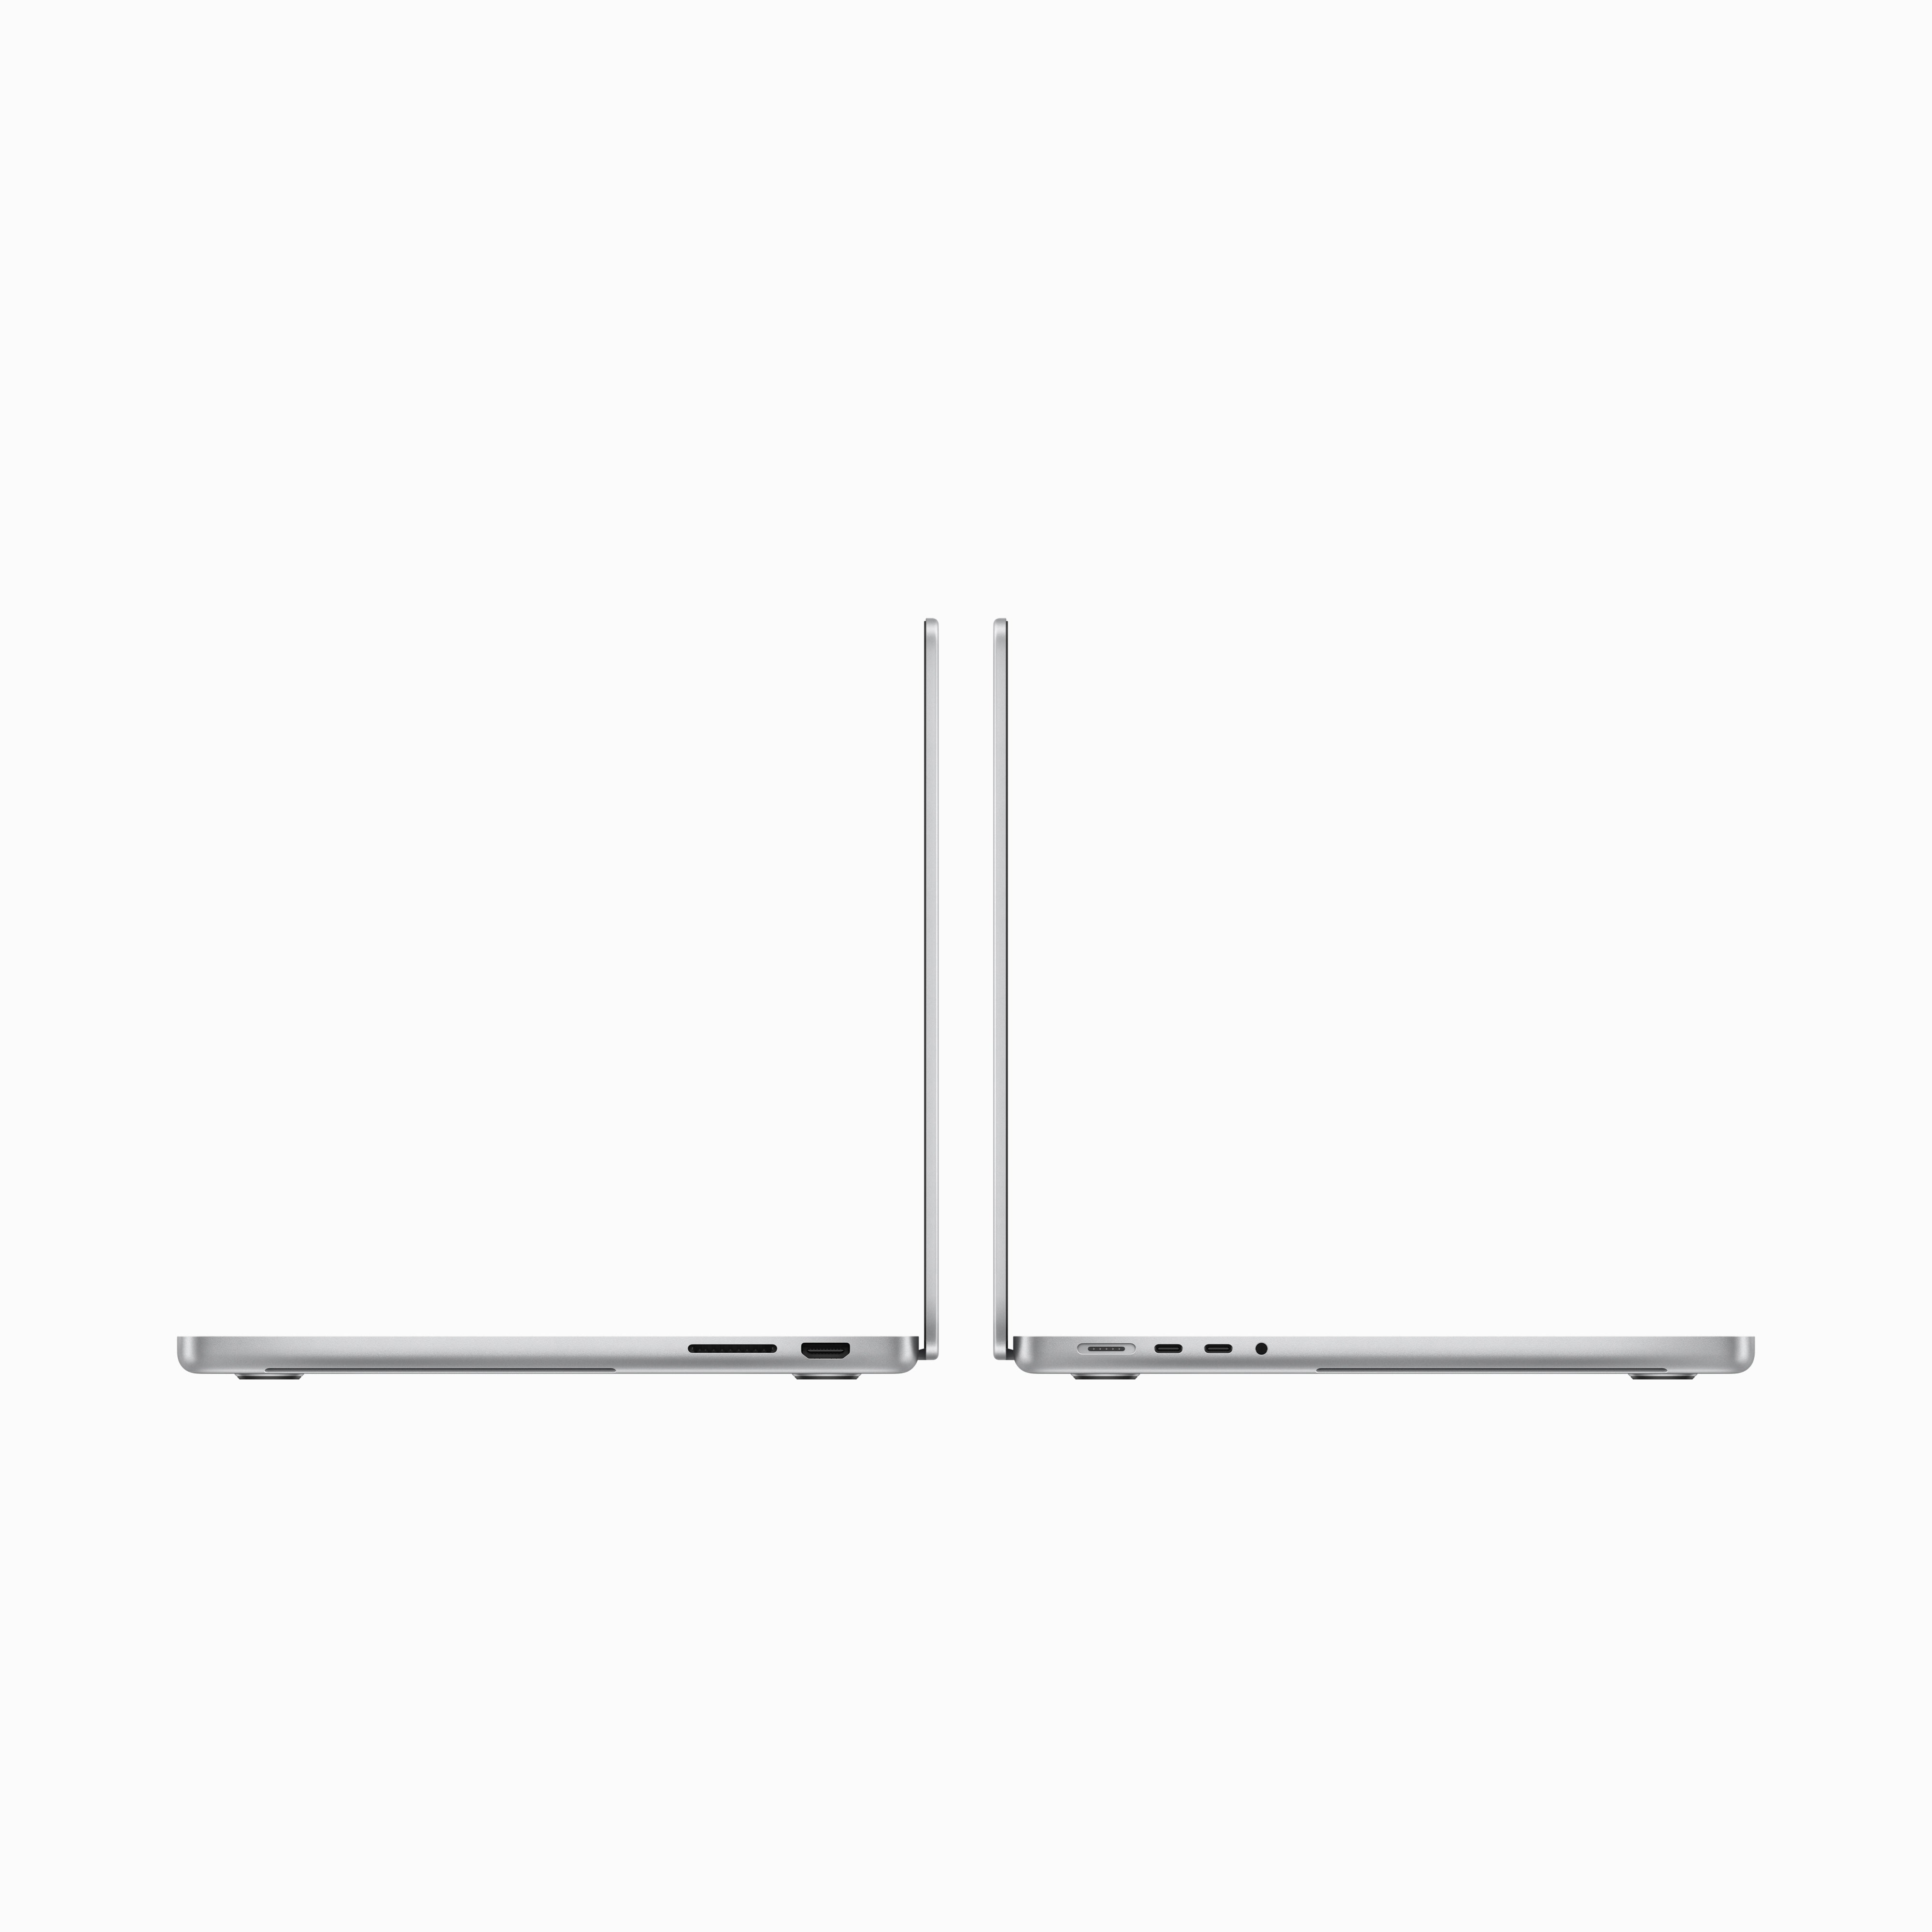 14-inch MacBook Pro: Apple M3 chip with 8C CPU and 10C GPU, 512GB SSD - Silver